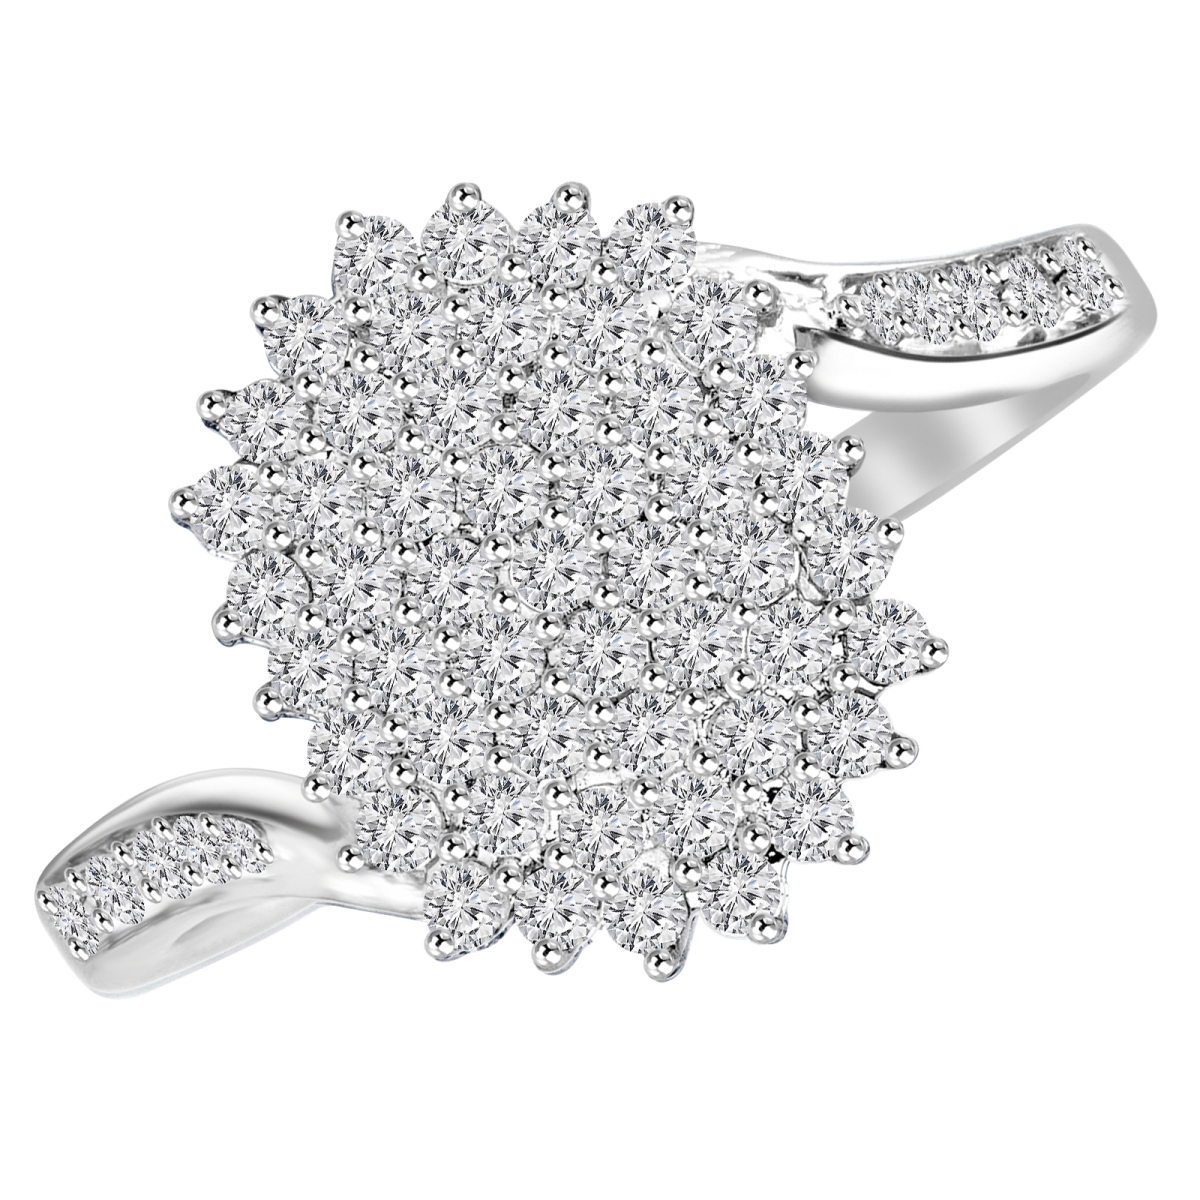 Picture of Majesty Diamonds MDR160007-3.5 0.5 CTW Round Diamond Cluster Cocktail Ring in 14K White Gold - Size 3.5